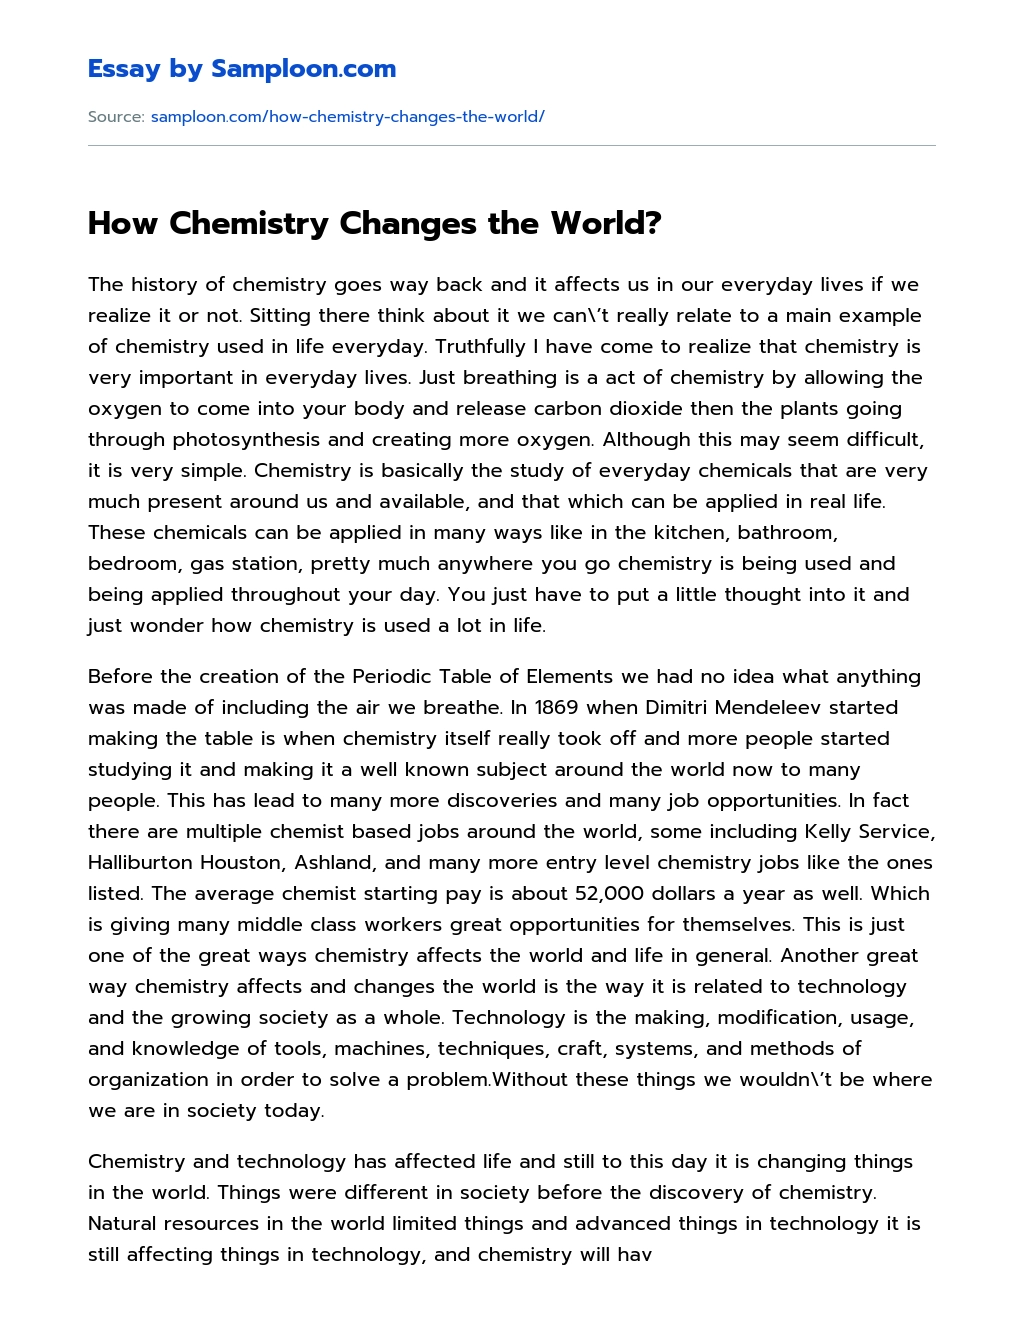 How Chemistry Changes the World? essay